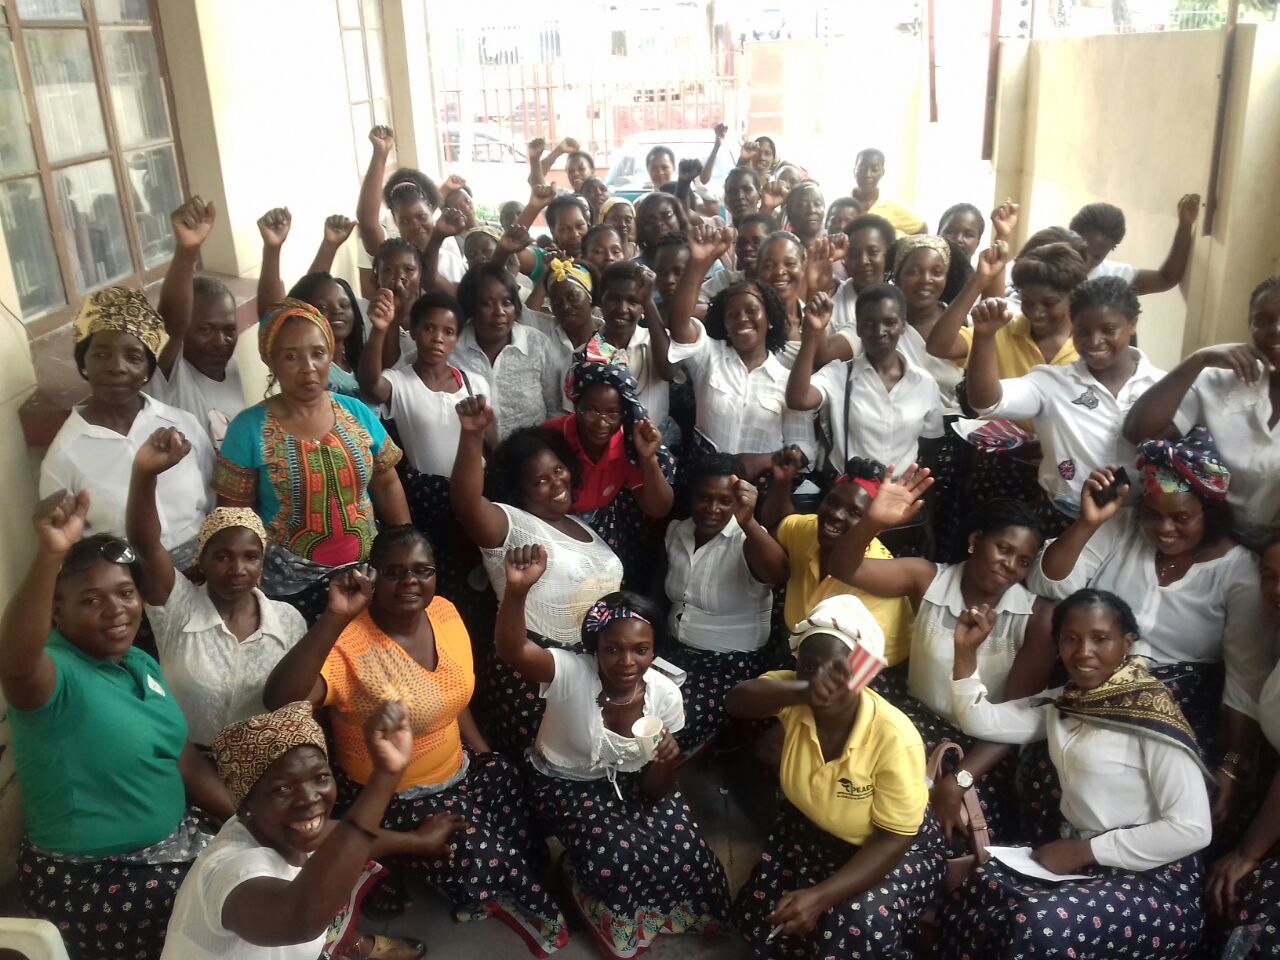 2018-2-11 Mozambique: Domestic workers celebrating New Year